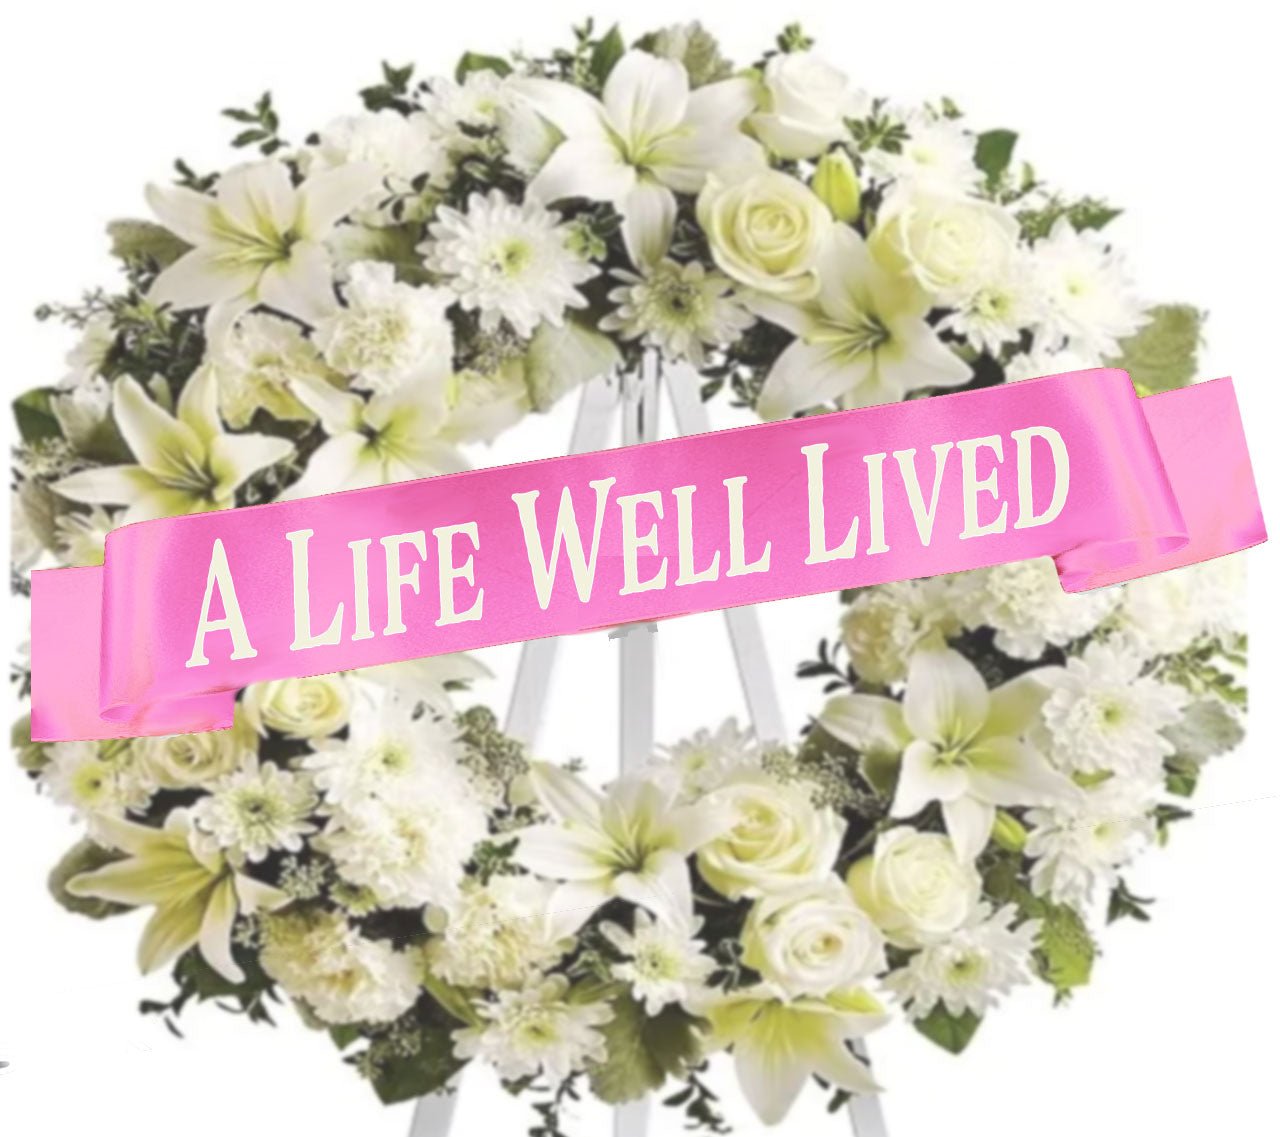 A Life Well Lived Funeral Flowers Ribbon Banner - Celebrate Prints